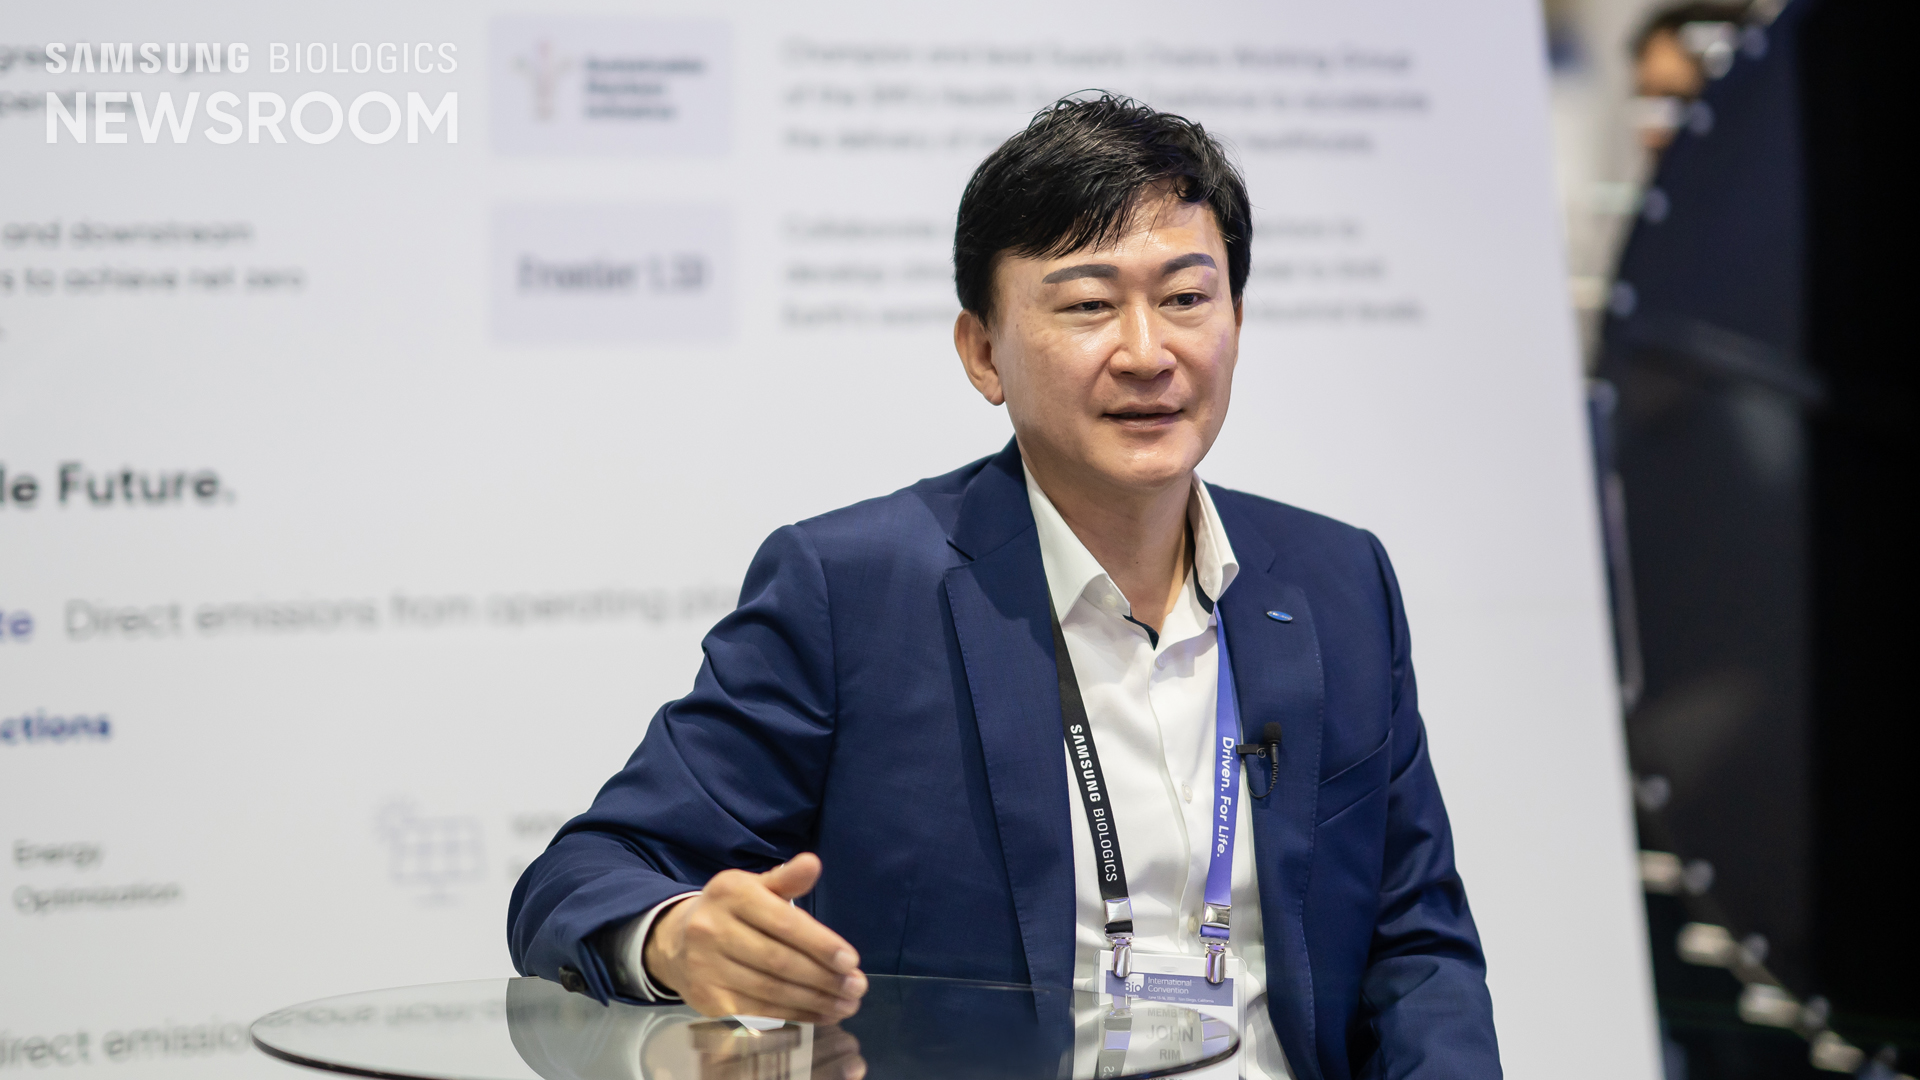 Interview with John Rim, CEO and President of Samsung Biologics2